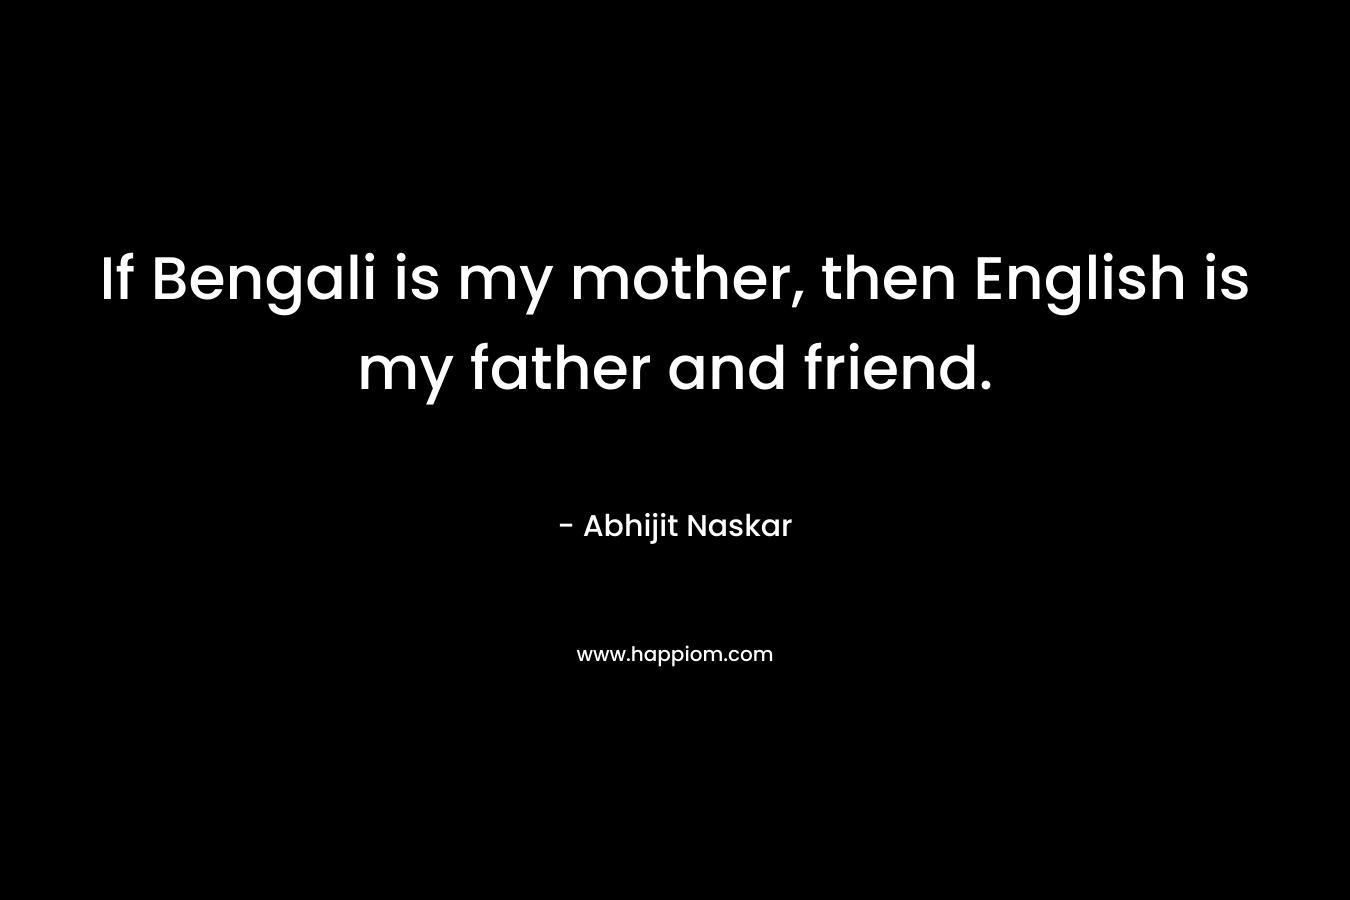 If Bengali is my mother, then English is my father and friend. – Abhijit Naskar